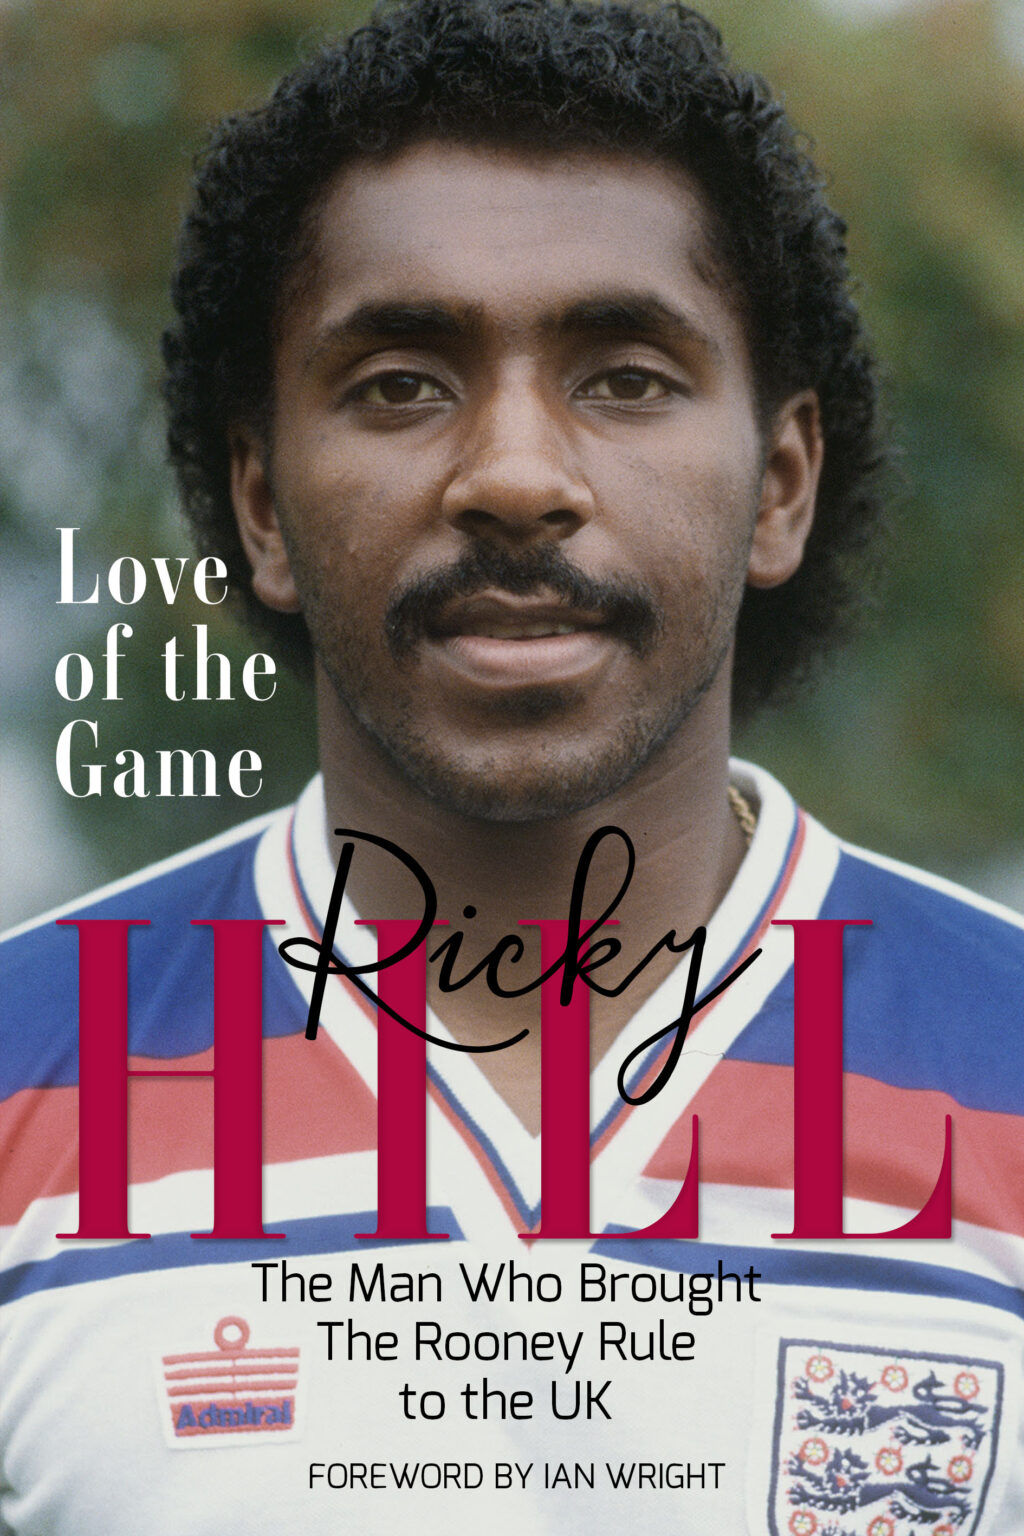 Love of the Game by Ricky Hill